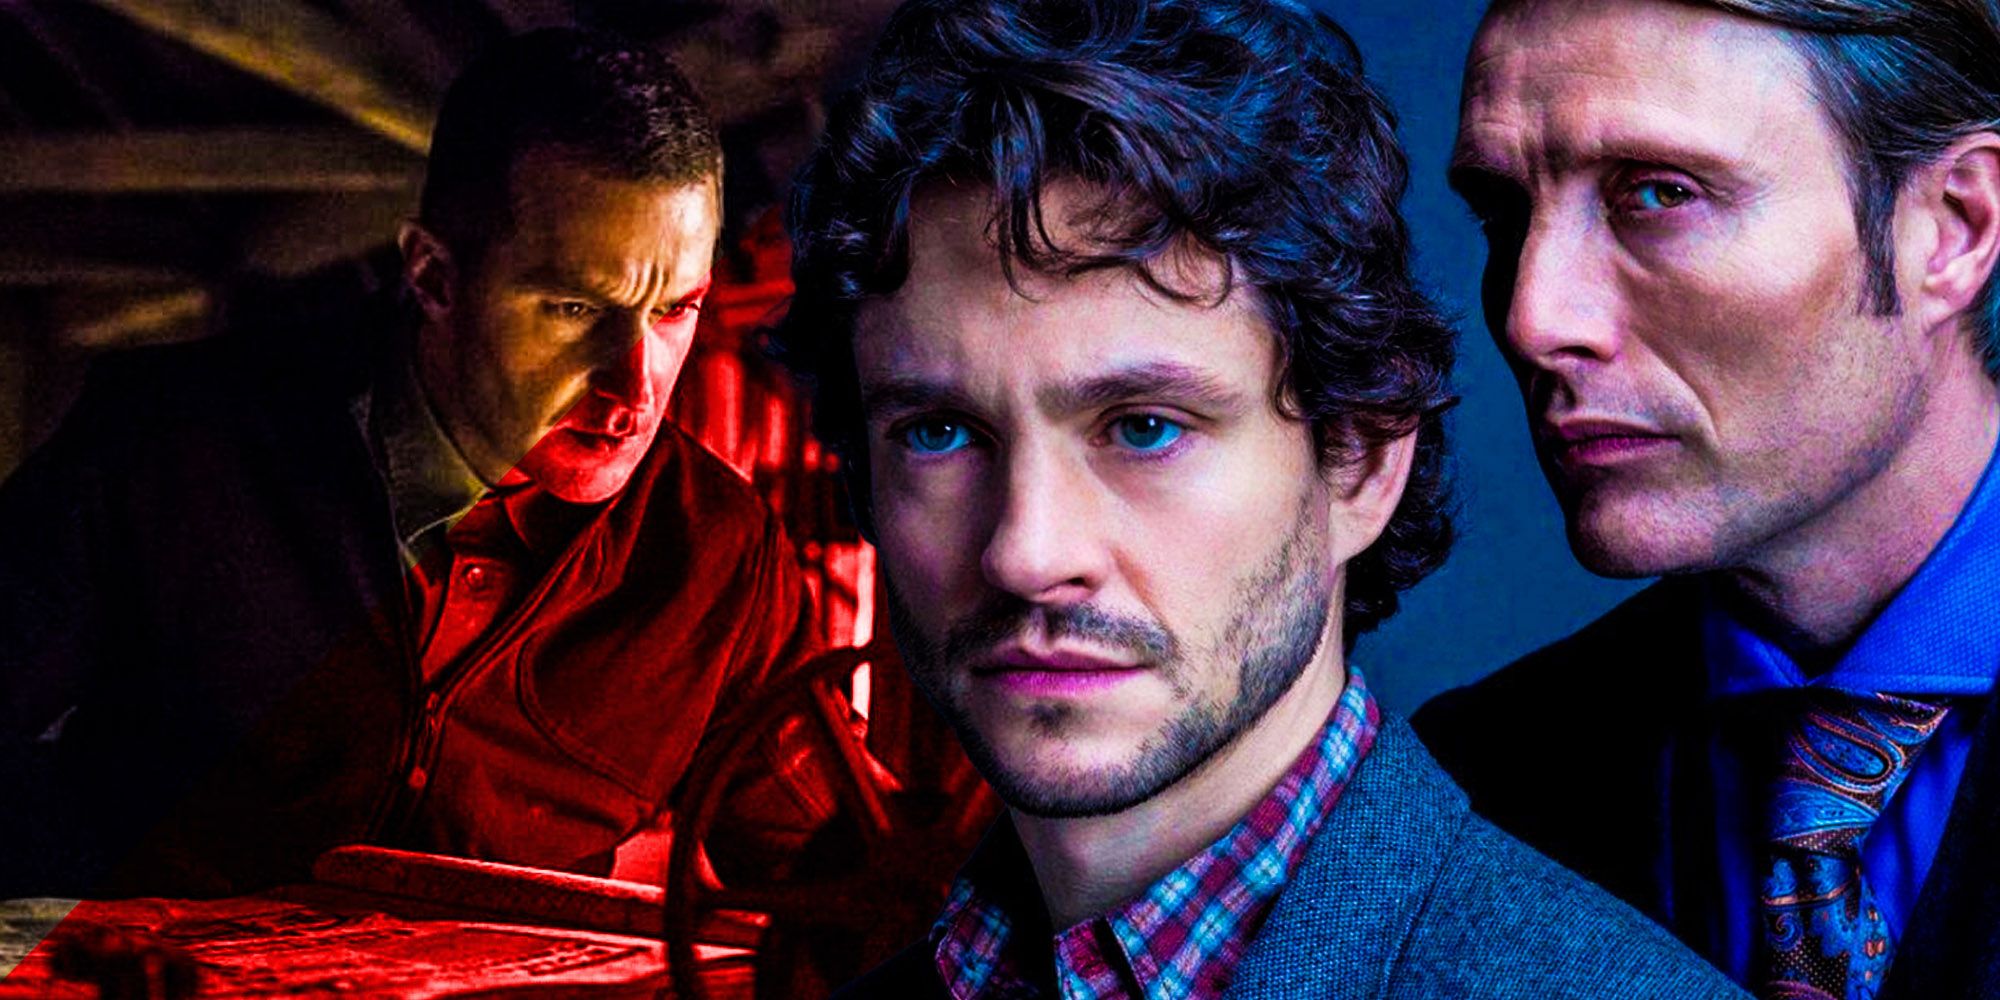 Will Graham Hannibal The red dragon committed the unsolved murders in pilot